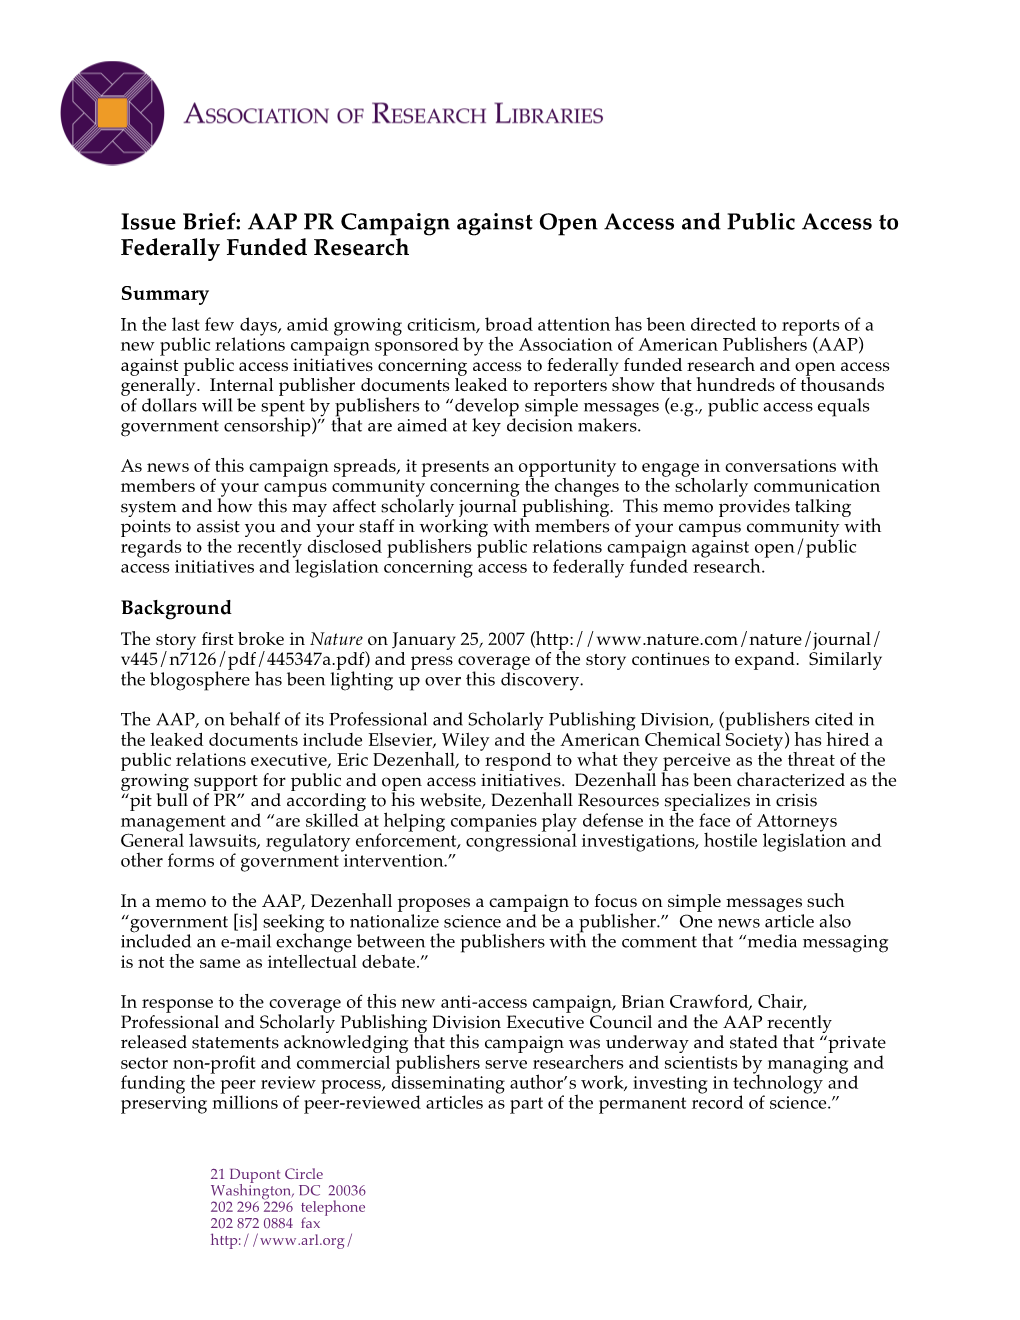 Issue Brief: AAP PR Campaign Against Open Access and Public Access to Federally Funded Research